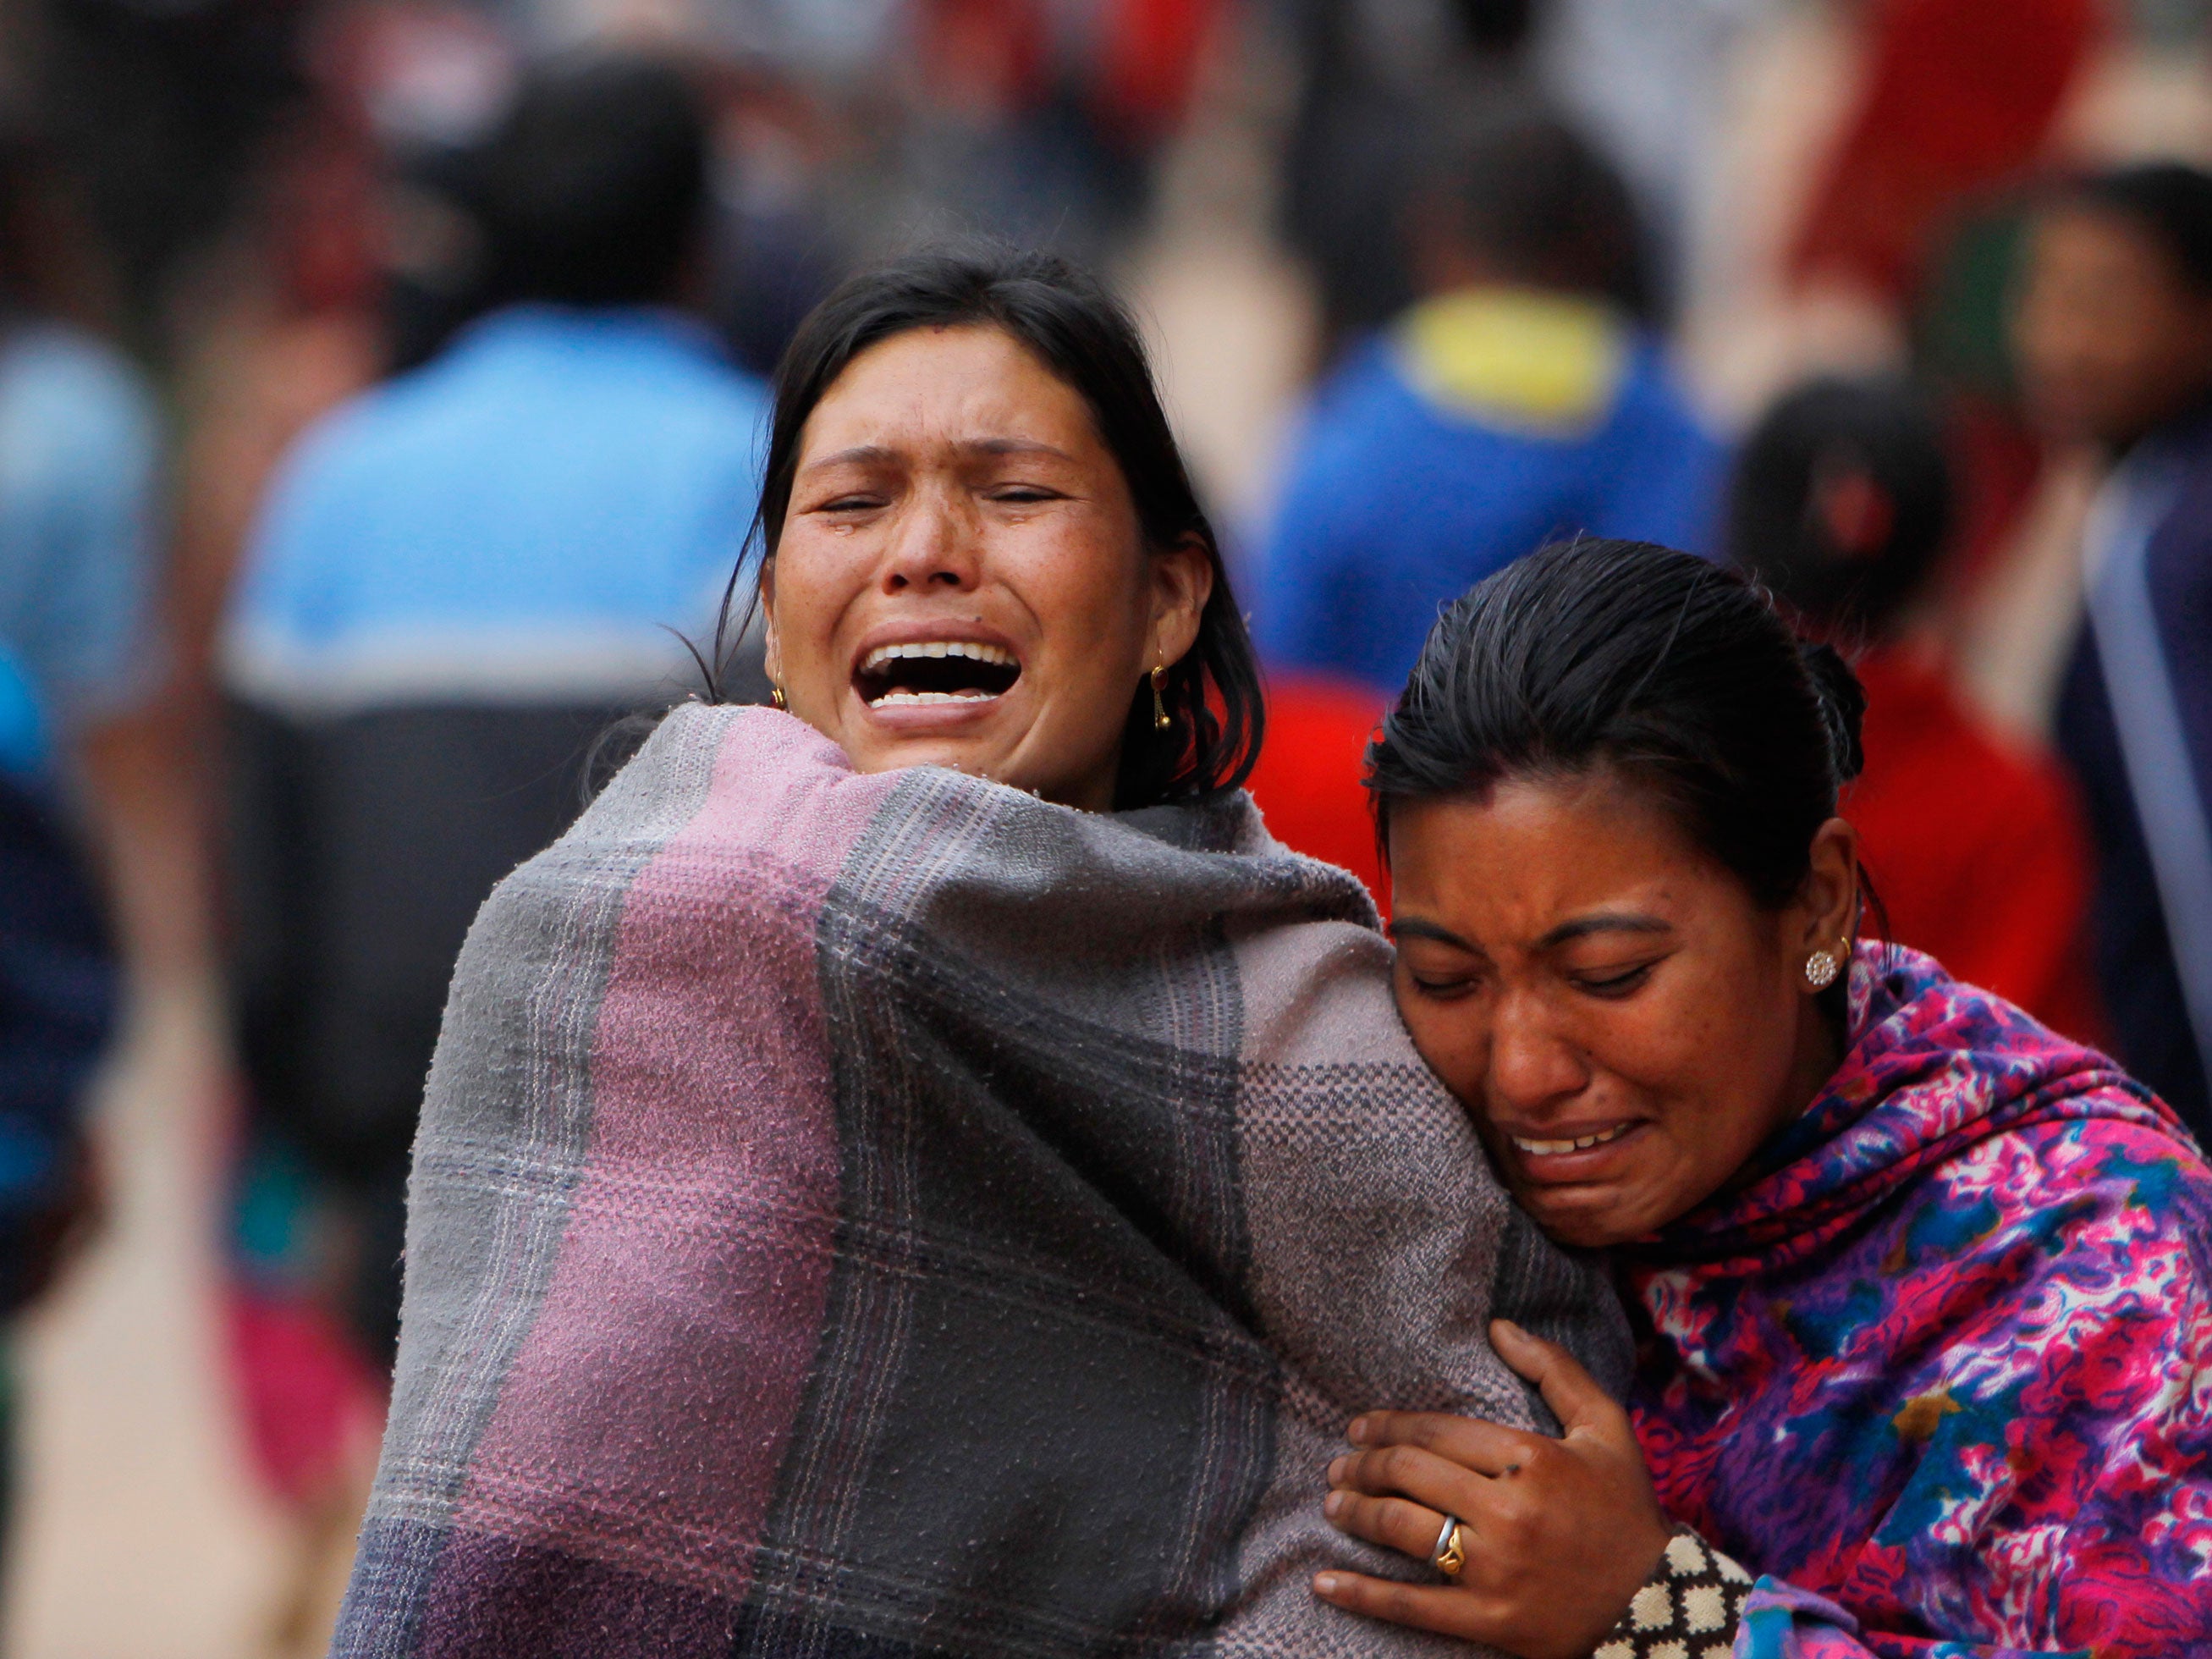 Family members break down during the cremation of an earthquake victim in Bhaktapur